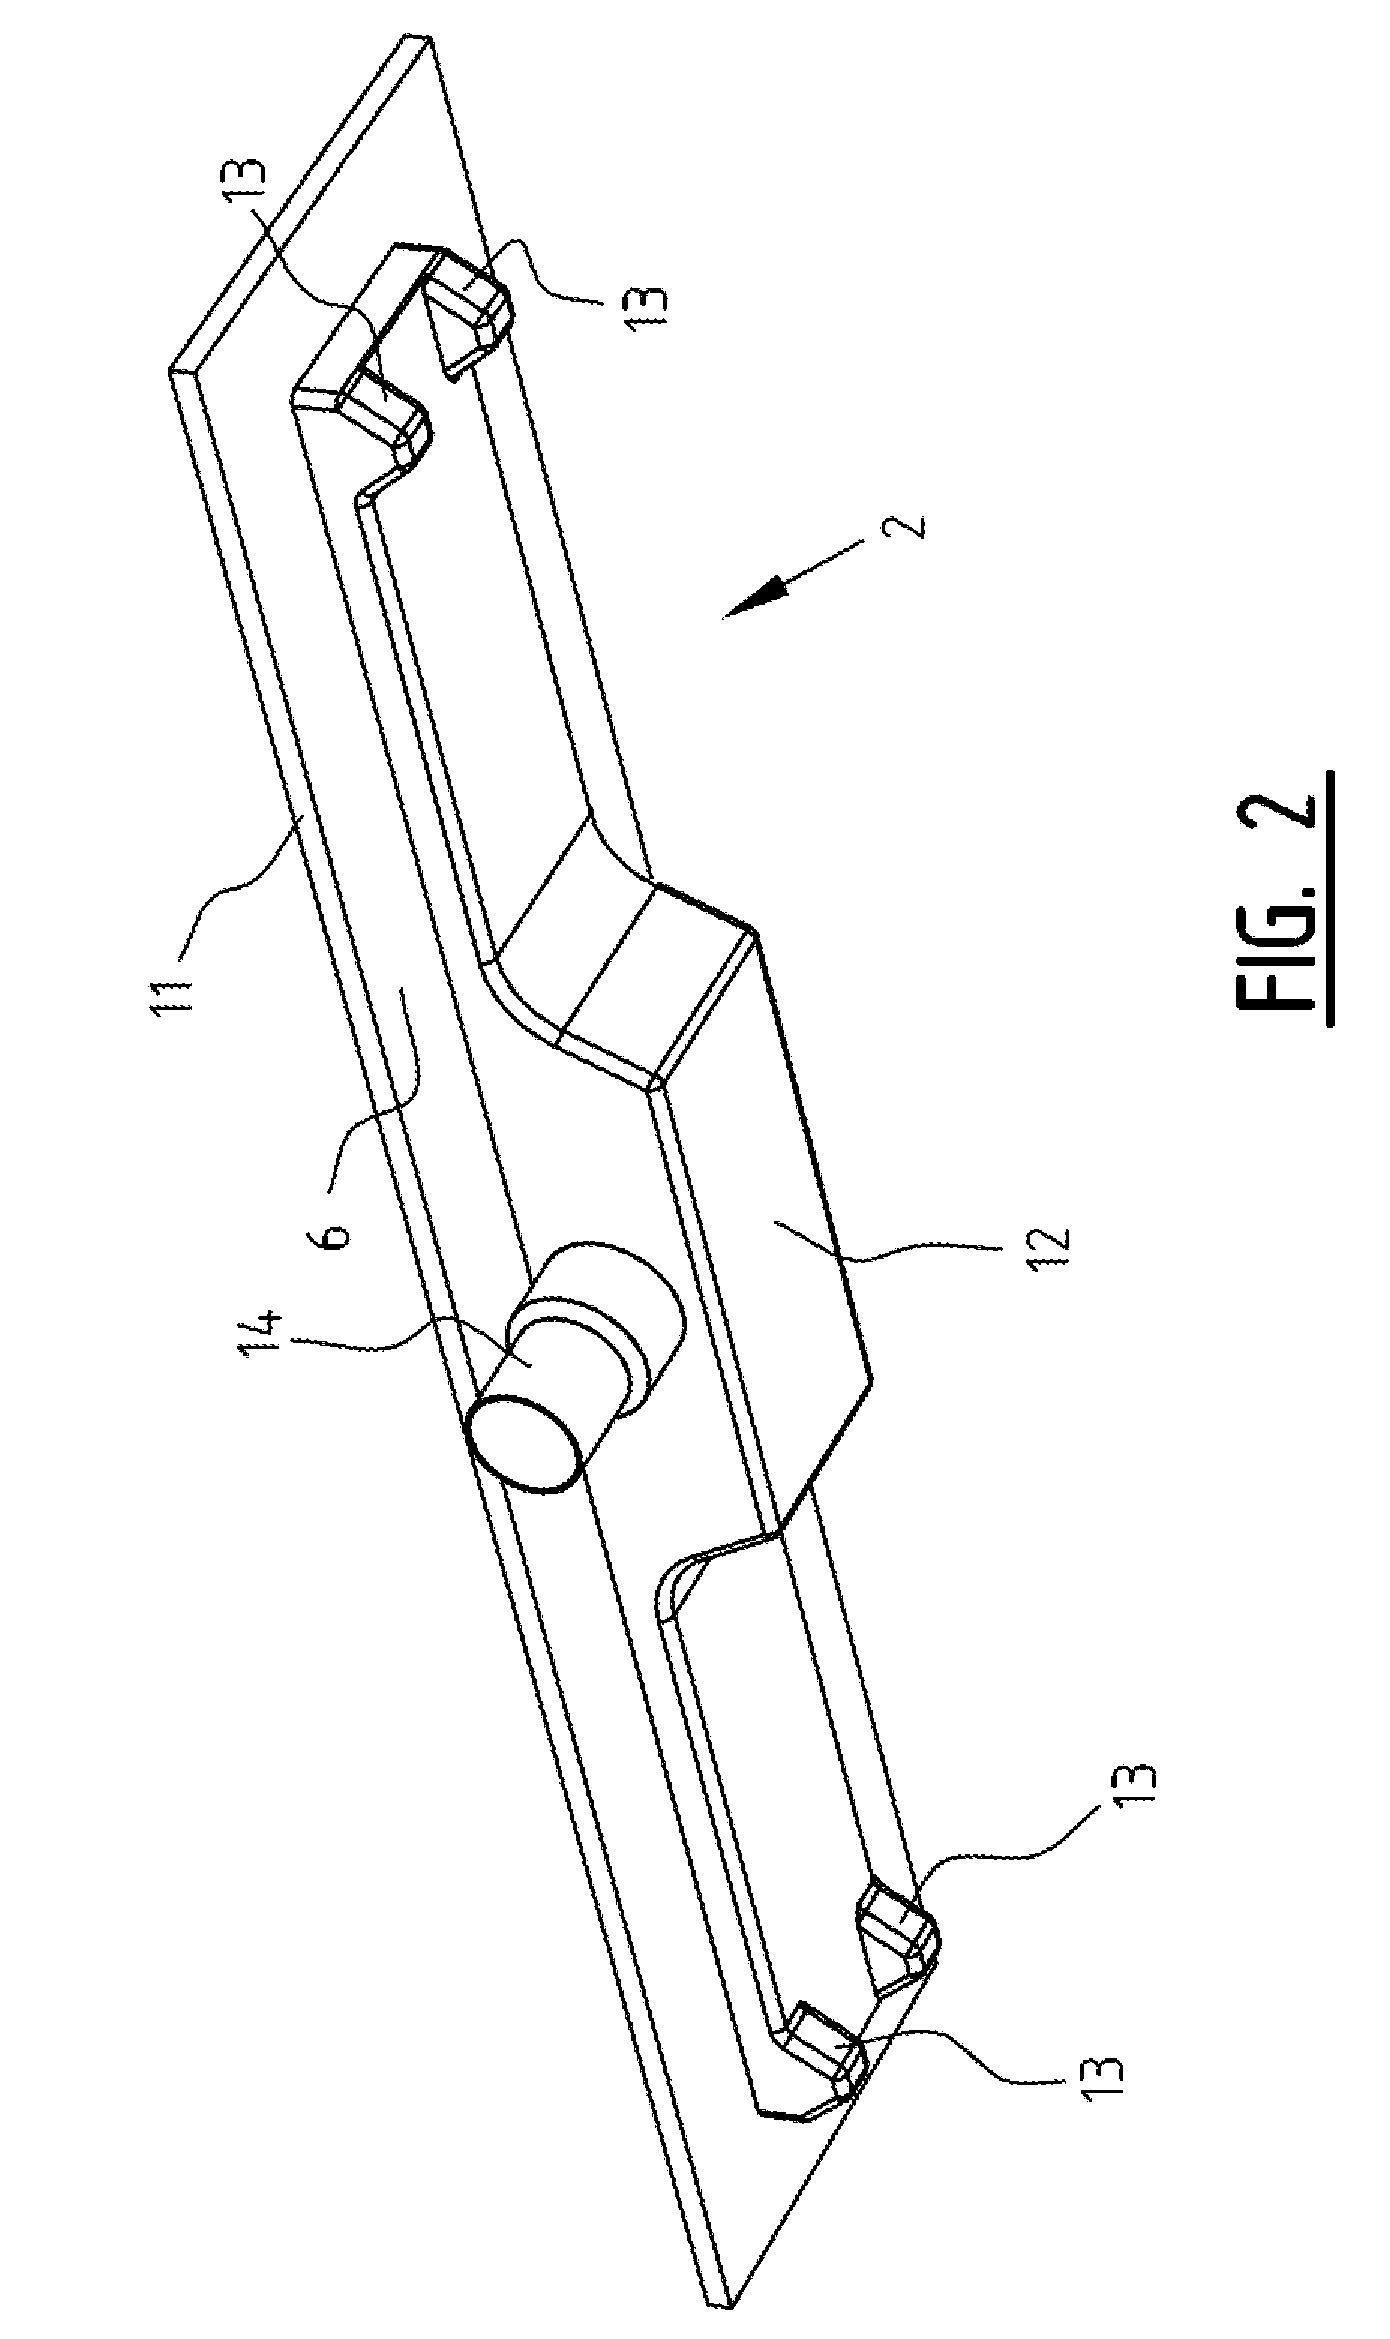 Drain assembly, drain body for use in such an assembly and method for building-in of a drain